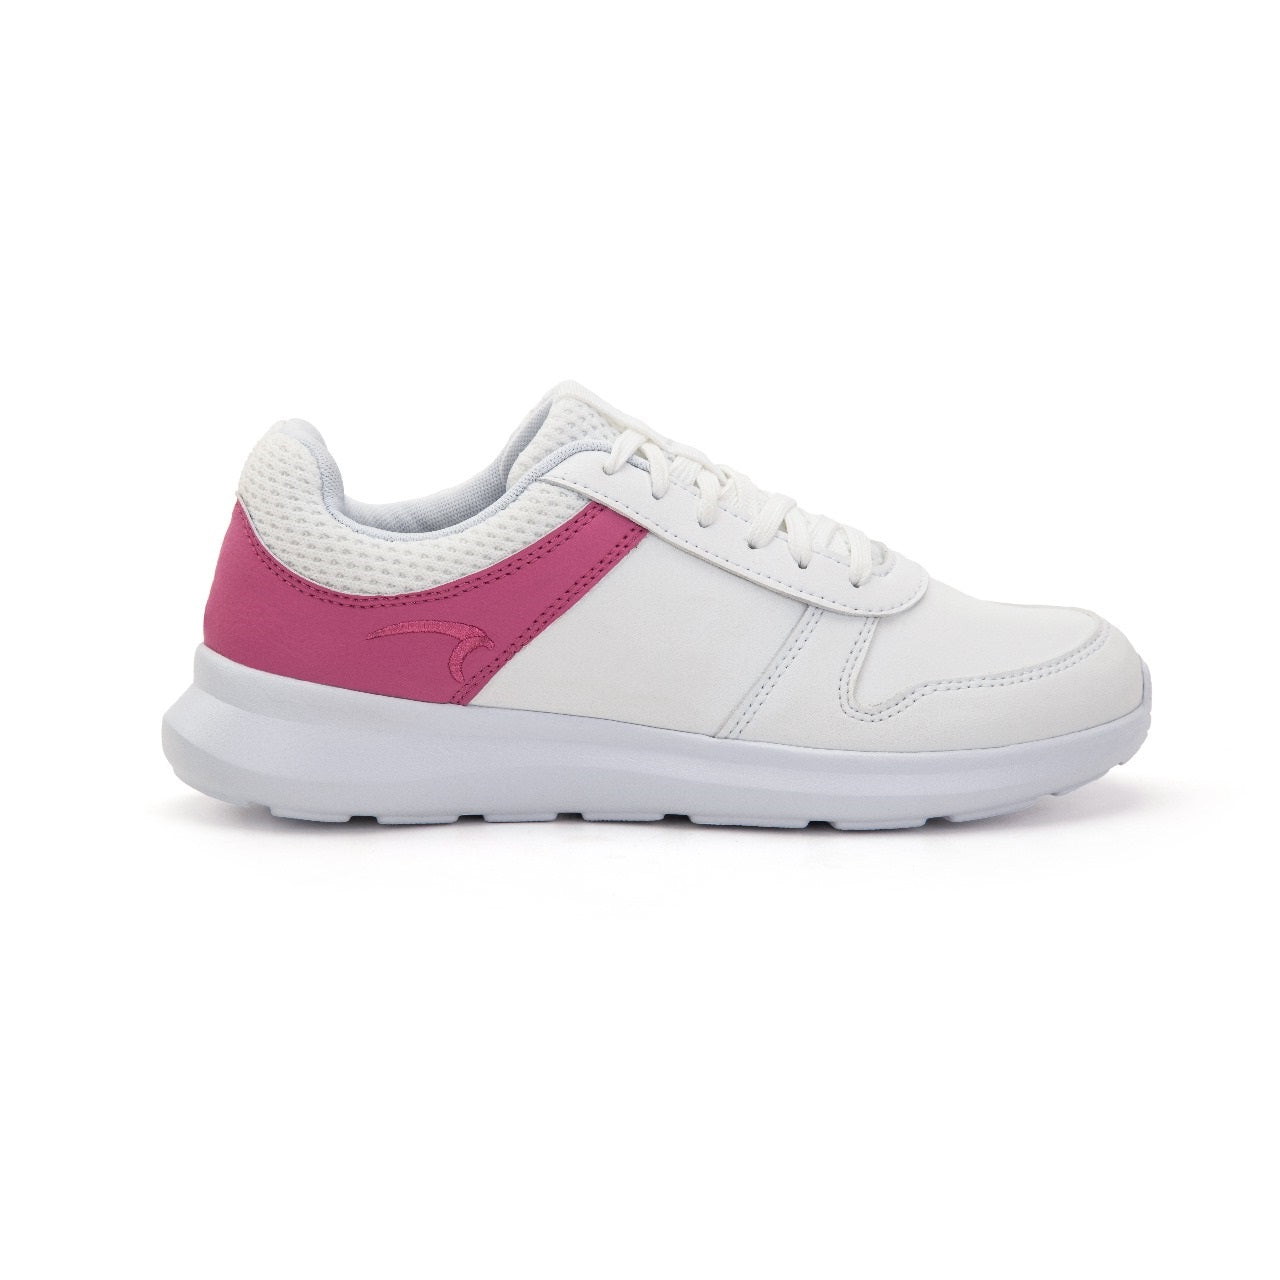 Mintra Alpha Lifestyle Shoes For Women, White & Carmine Rose